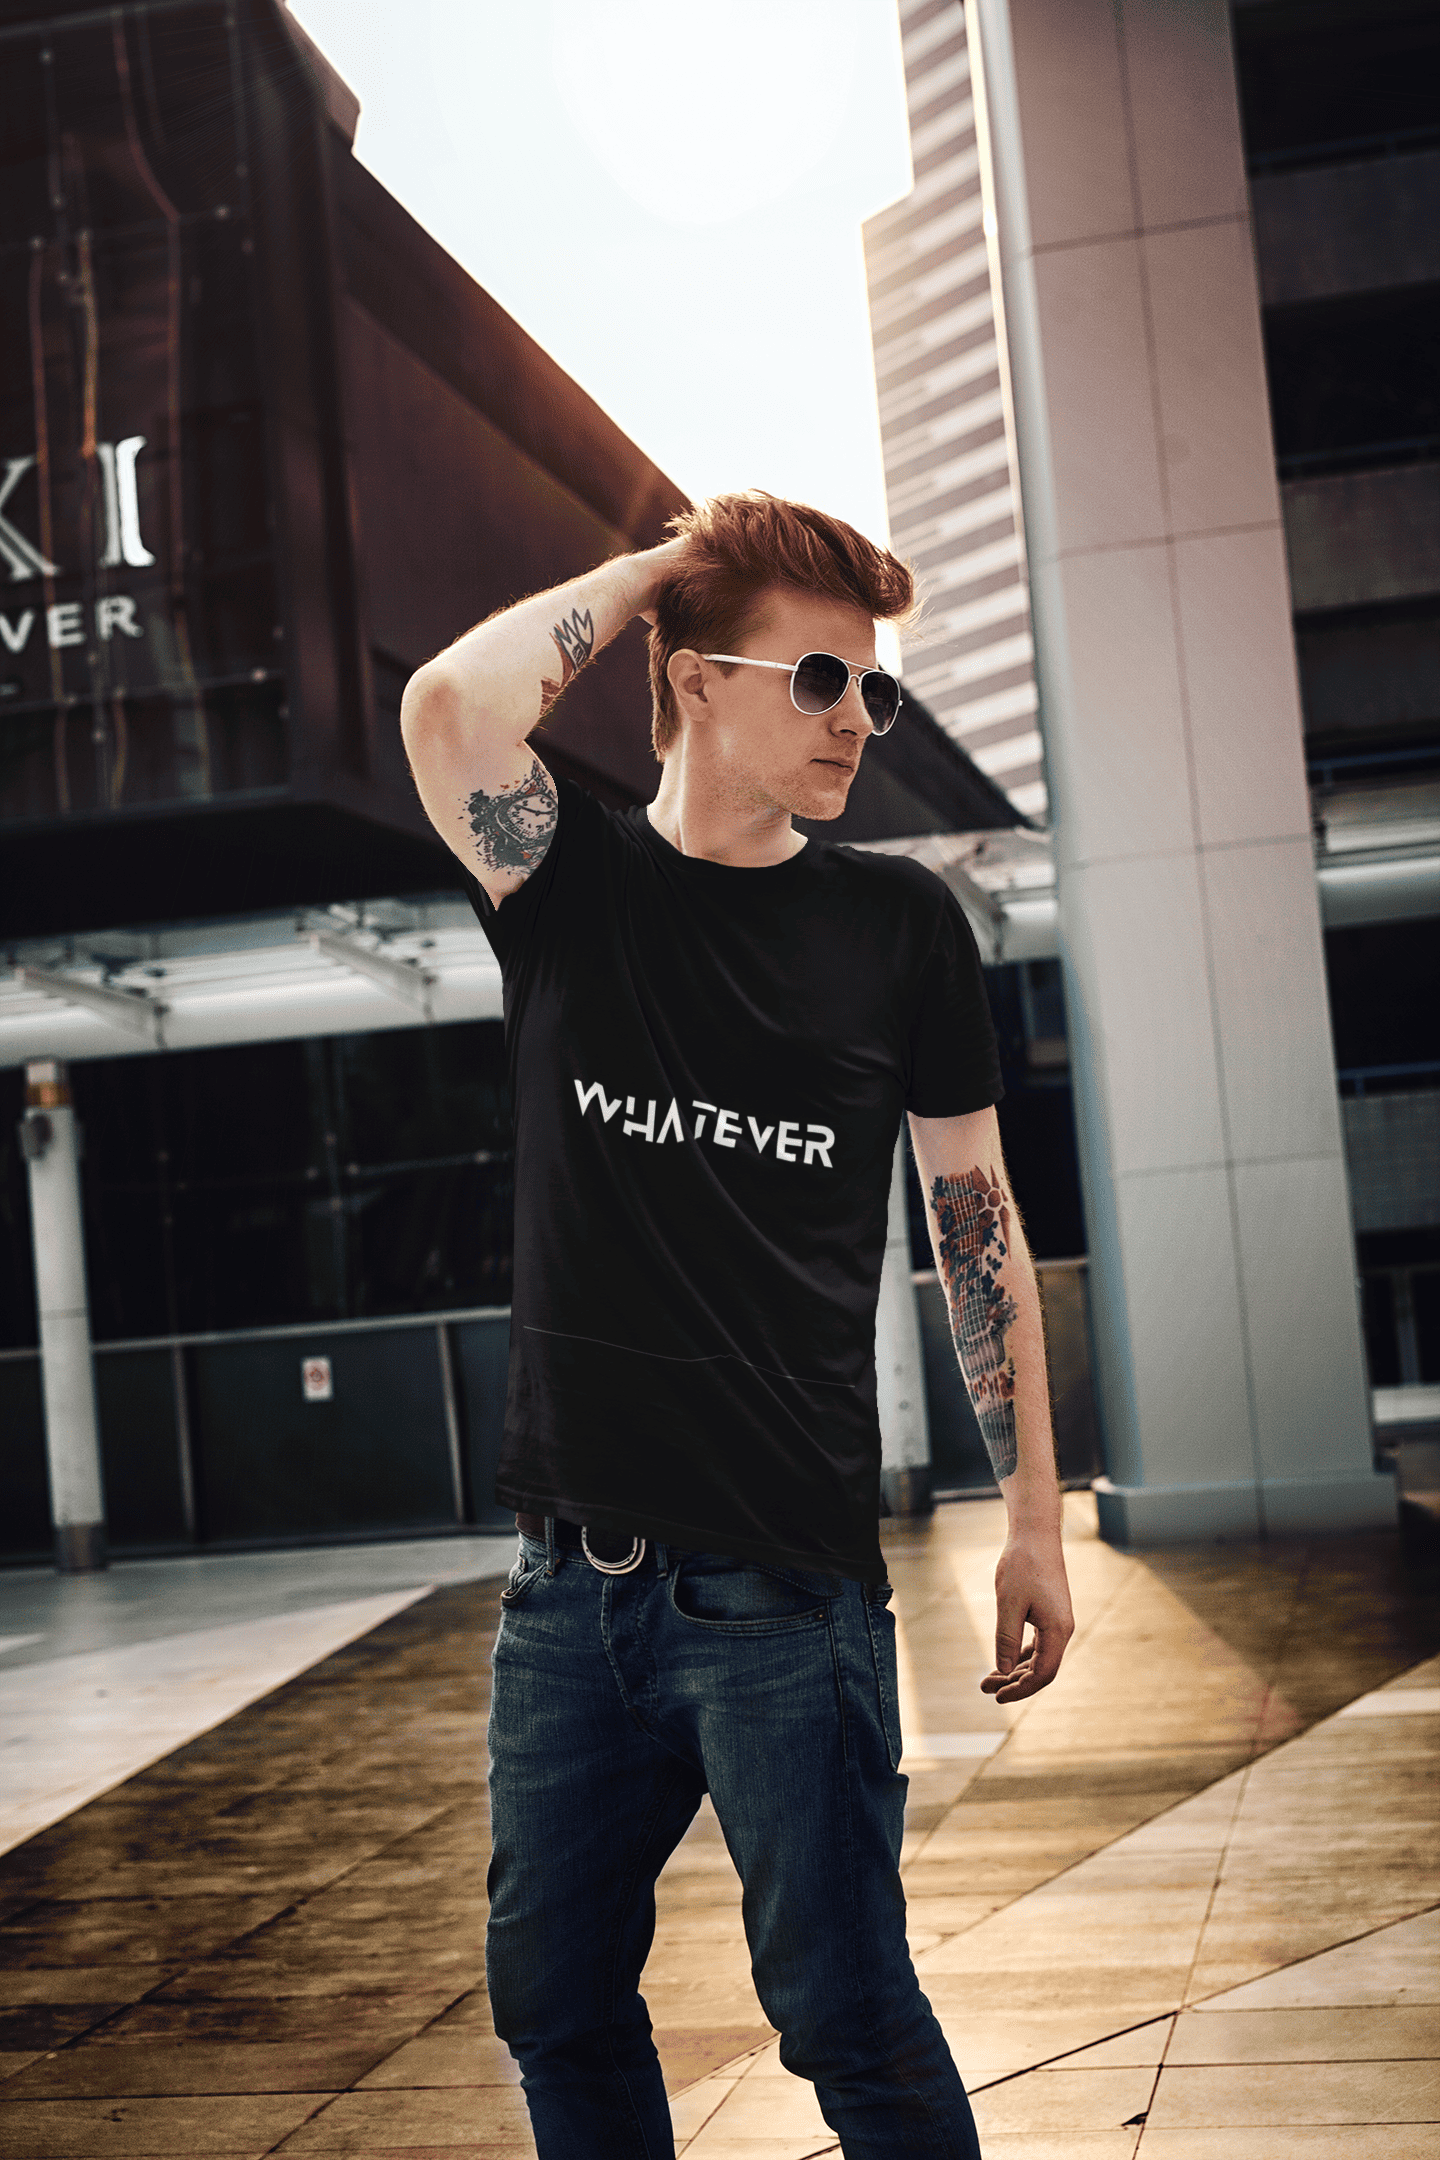 Trenfort's catchy Typography Cotton T-shirt truly for Men